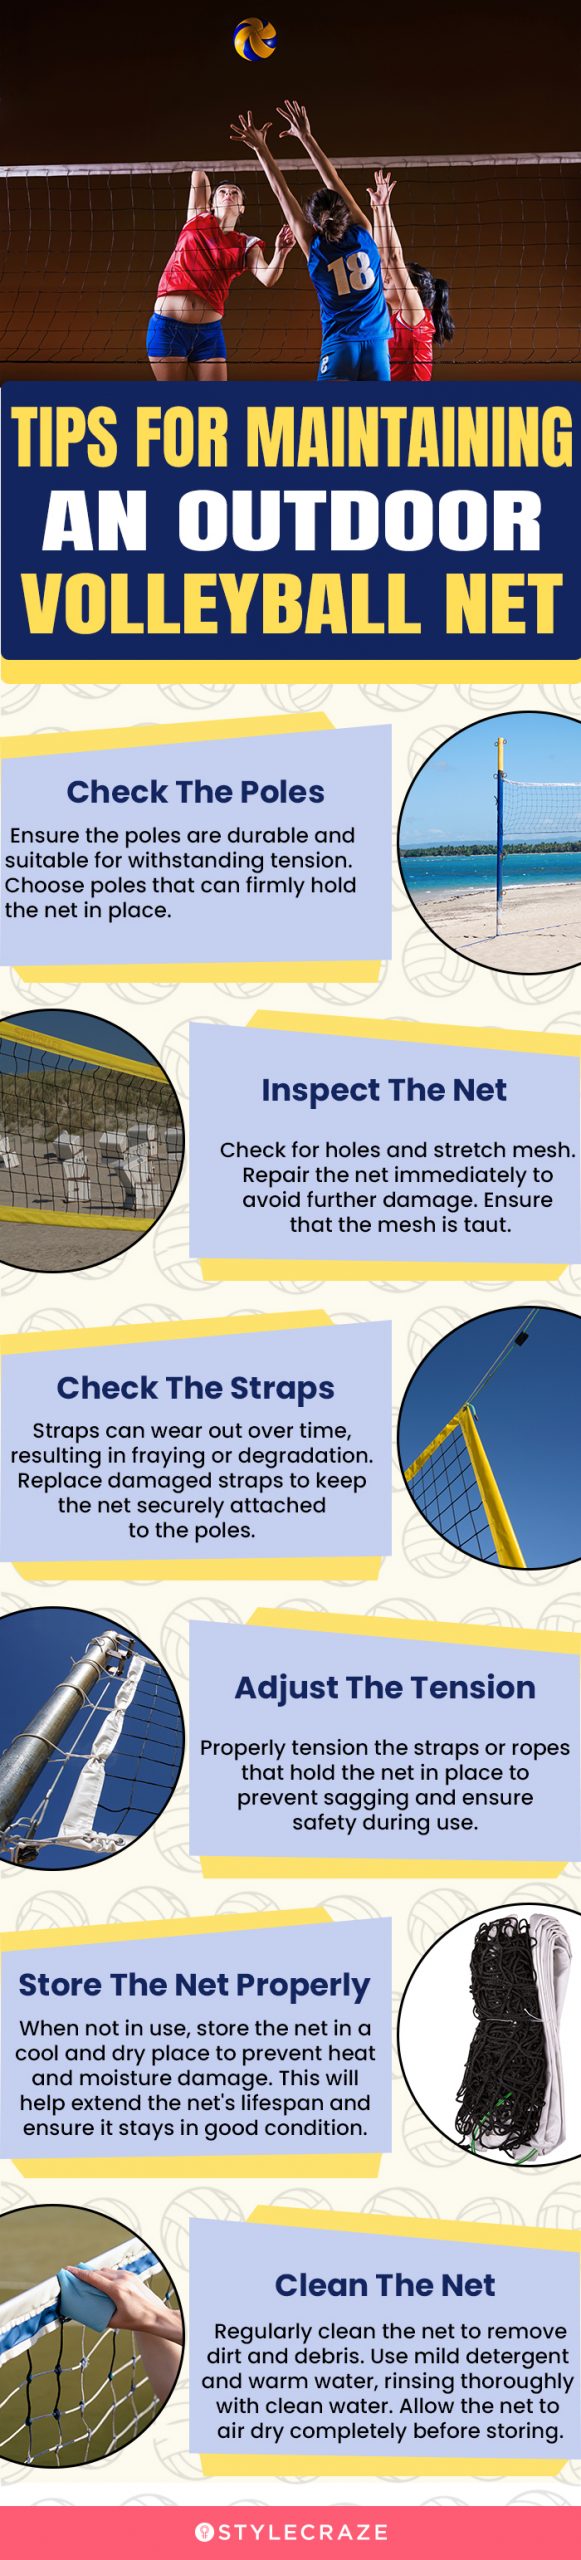 Tips For Maintaining An Outdoor Volleyball Net (infographic)